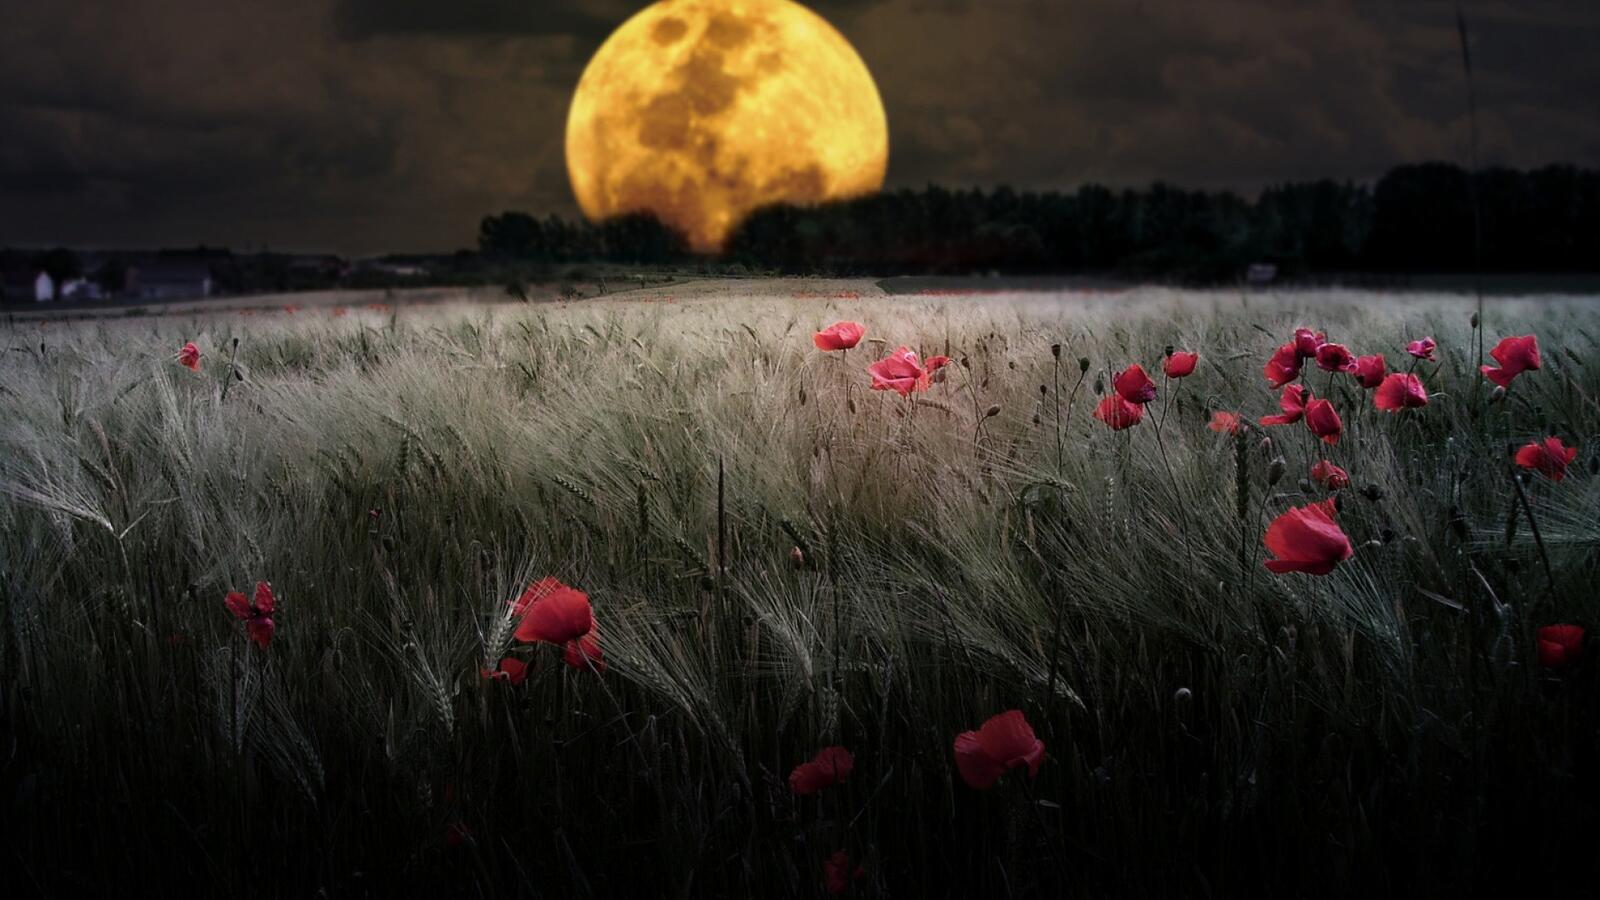 Free photo Wallpaper with a large yellow moon on a large field of flowers